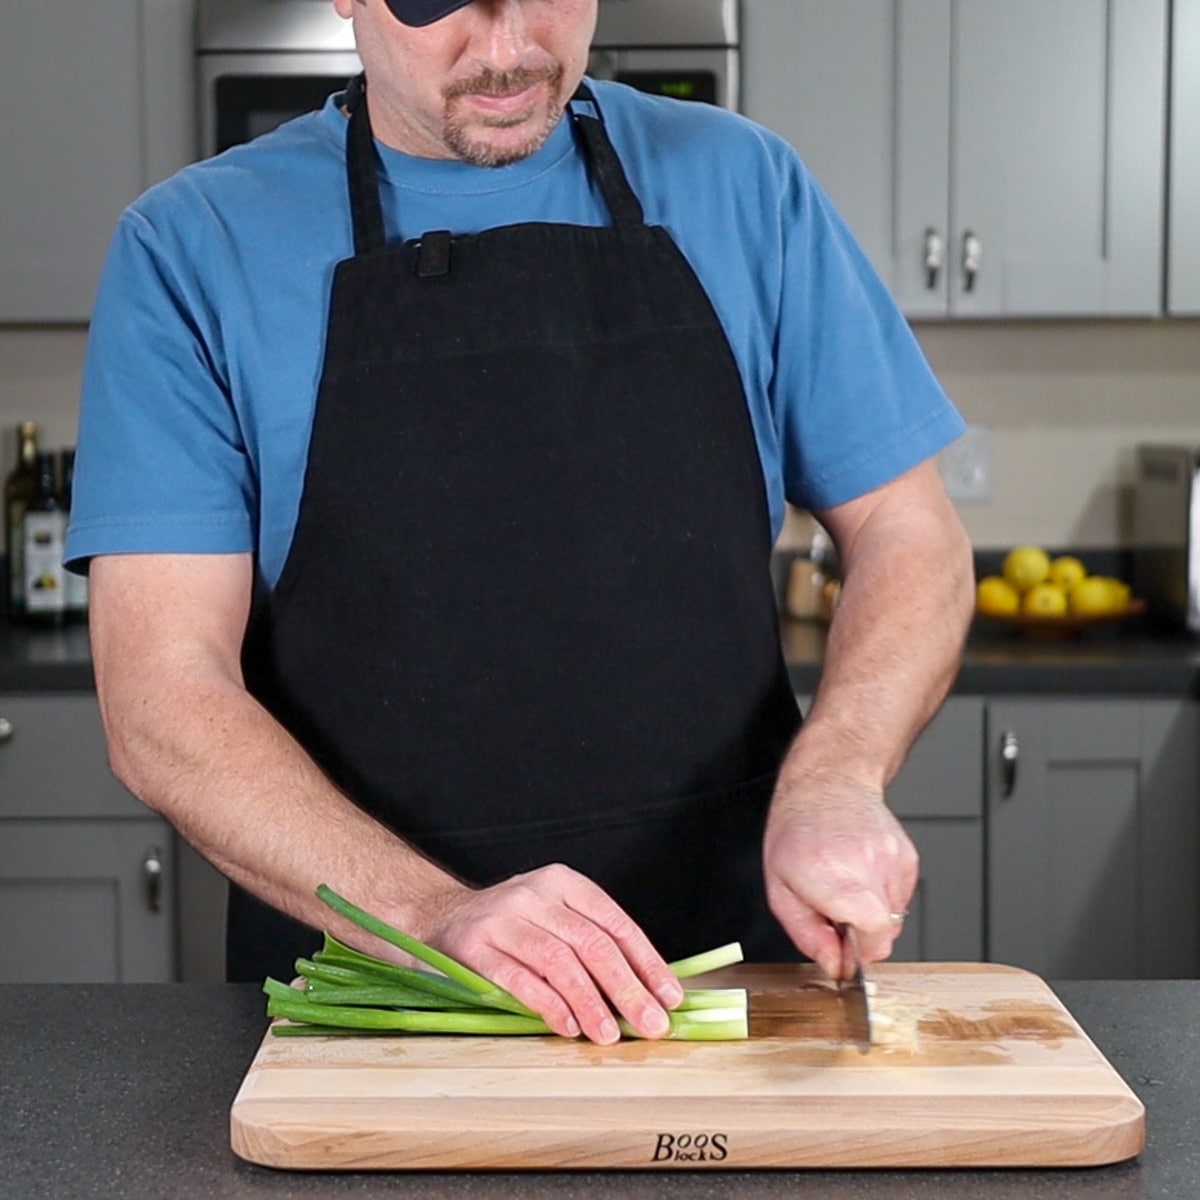 Cutting the ends of a green onion off on a cutting board.
